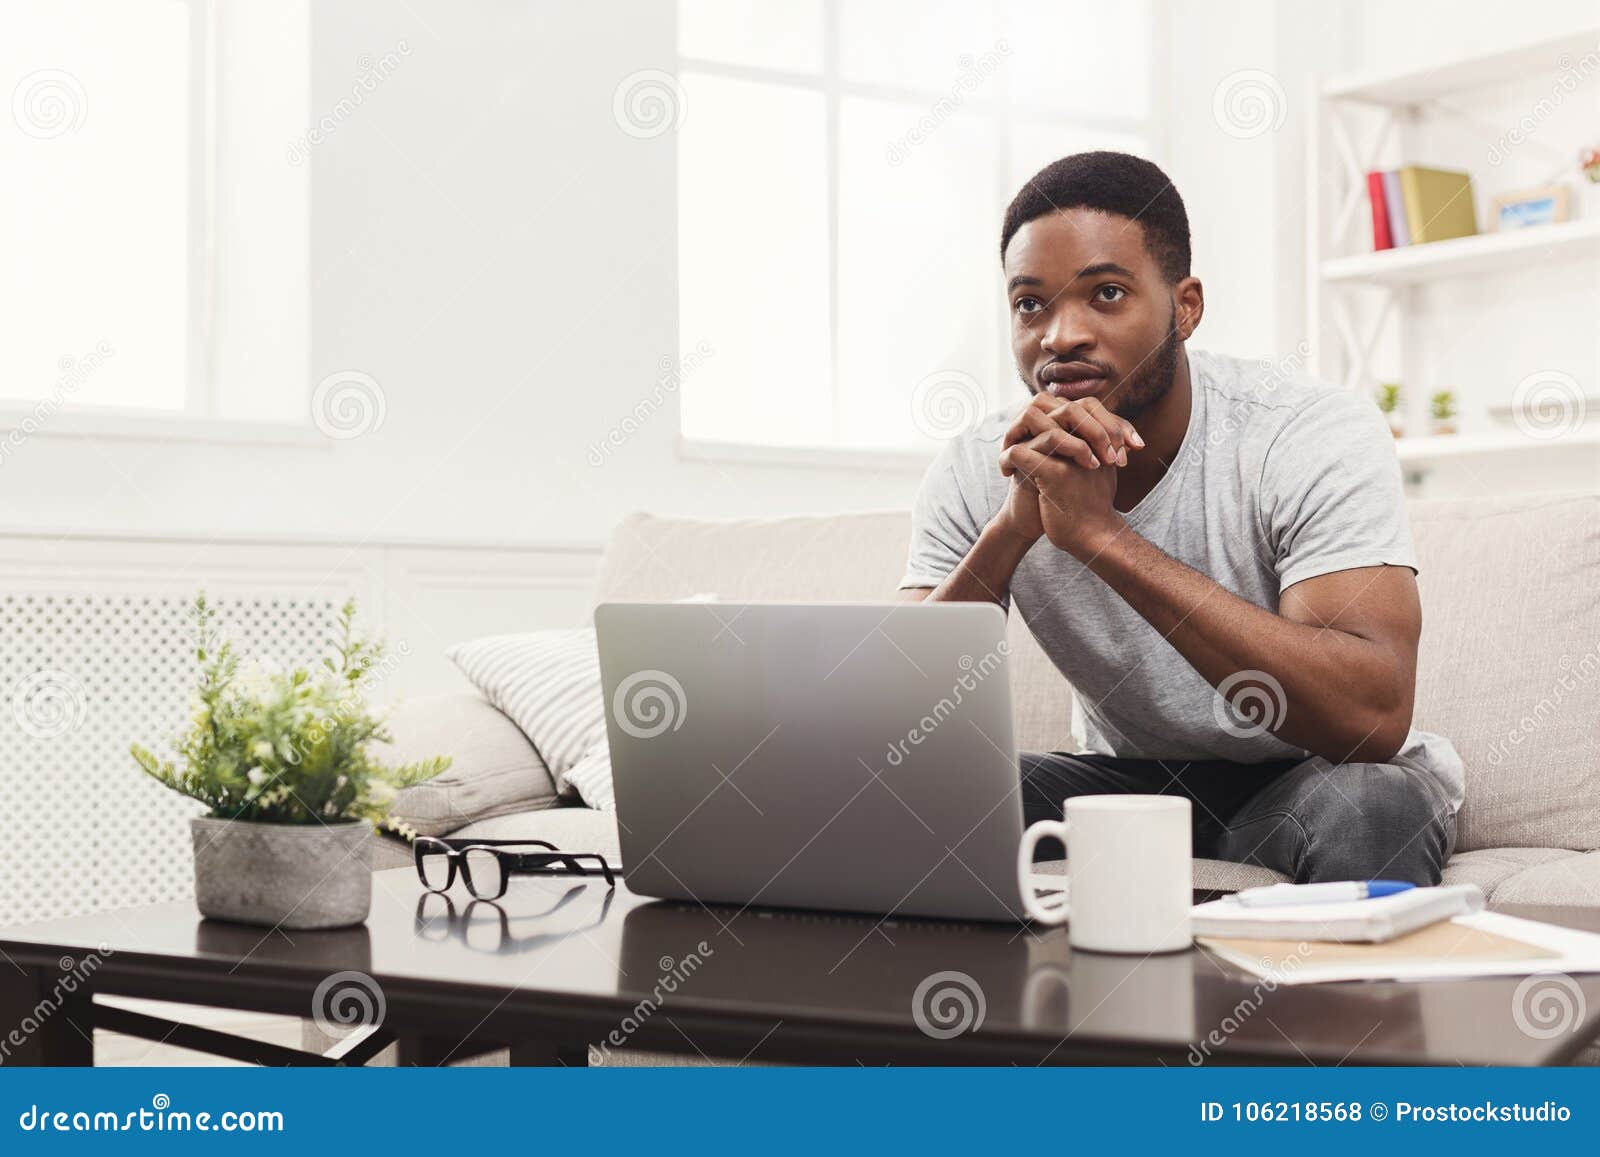 young thoughtful man at home messaging online on laptop